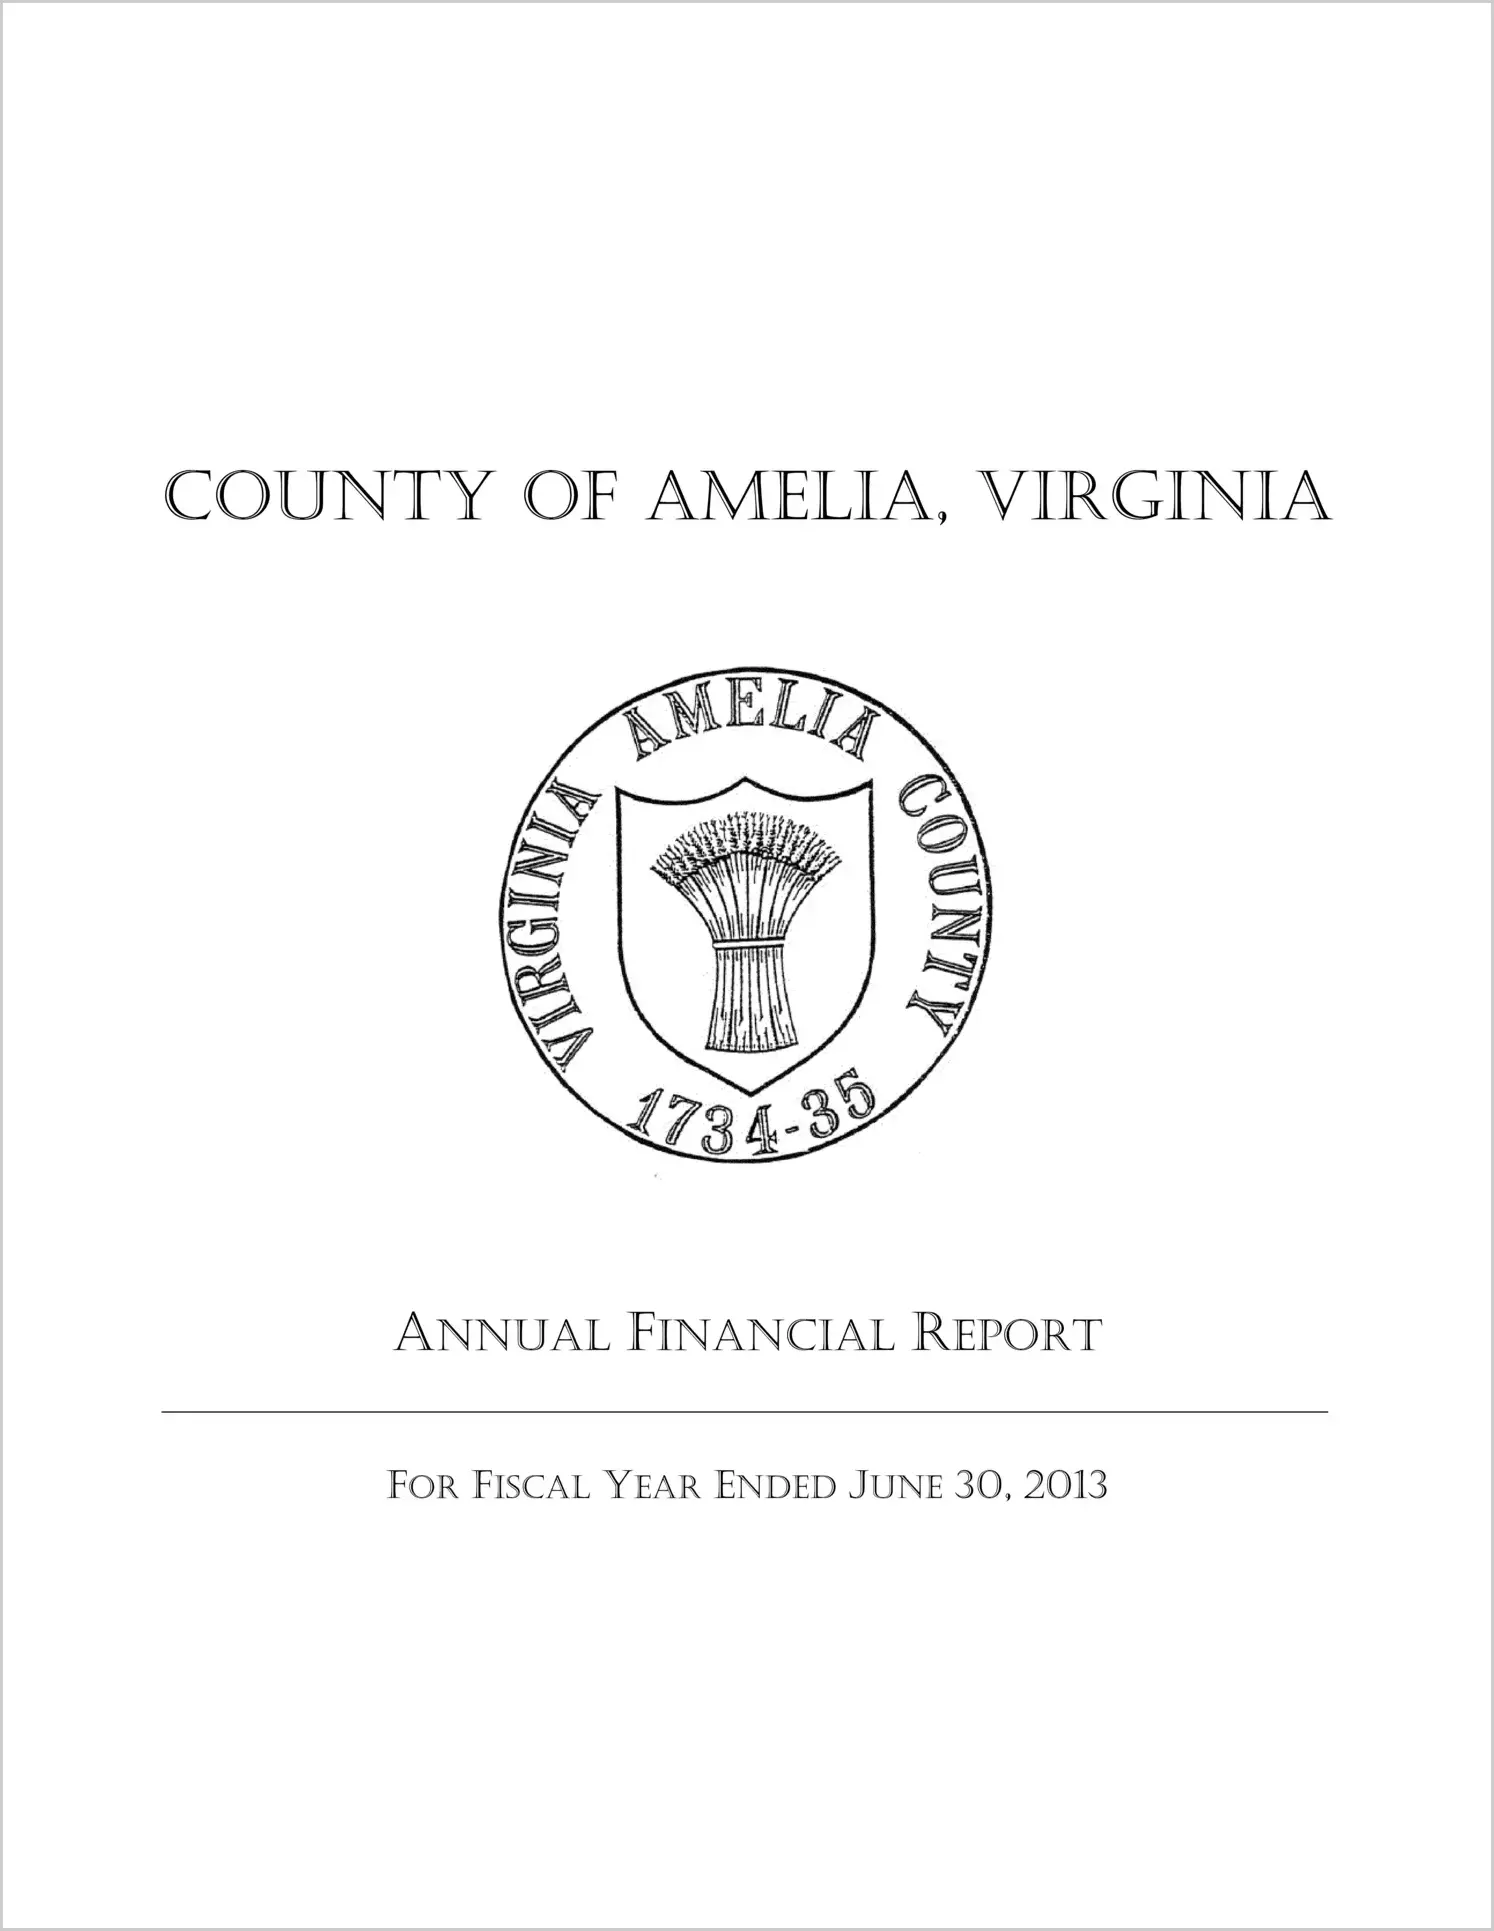 2013 Annual Financial Report for County of Amelia